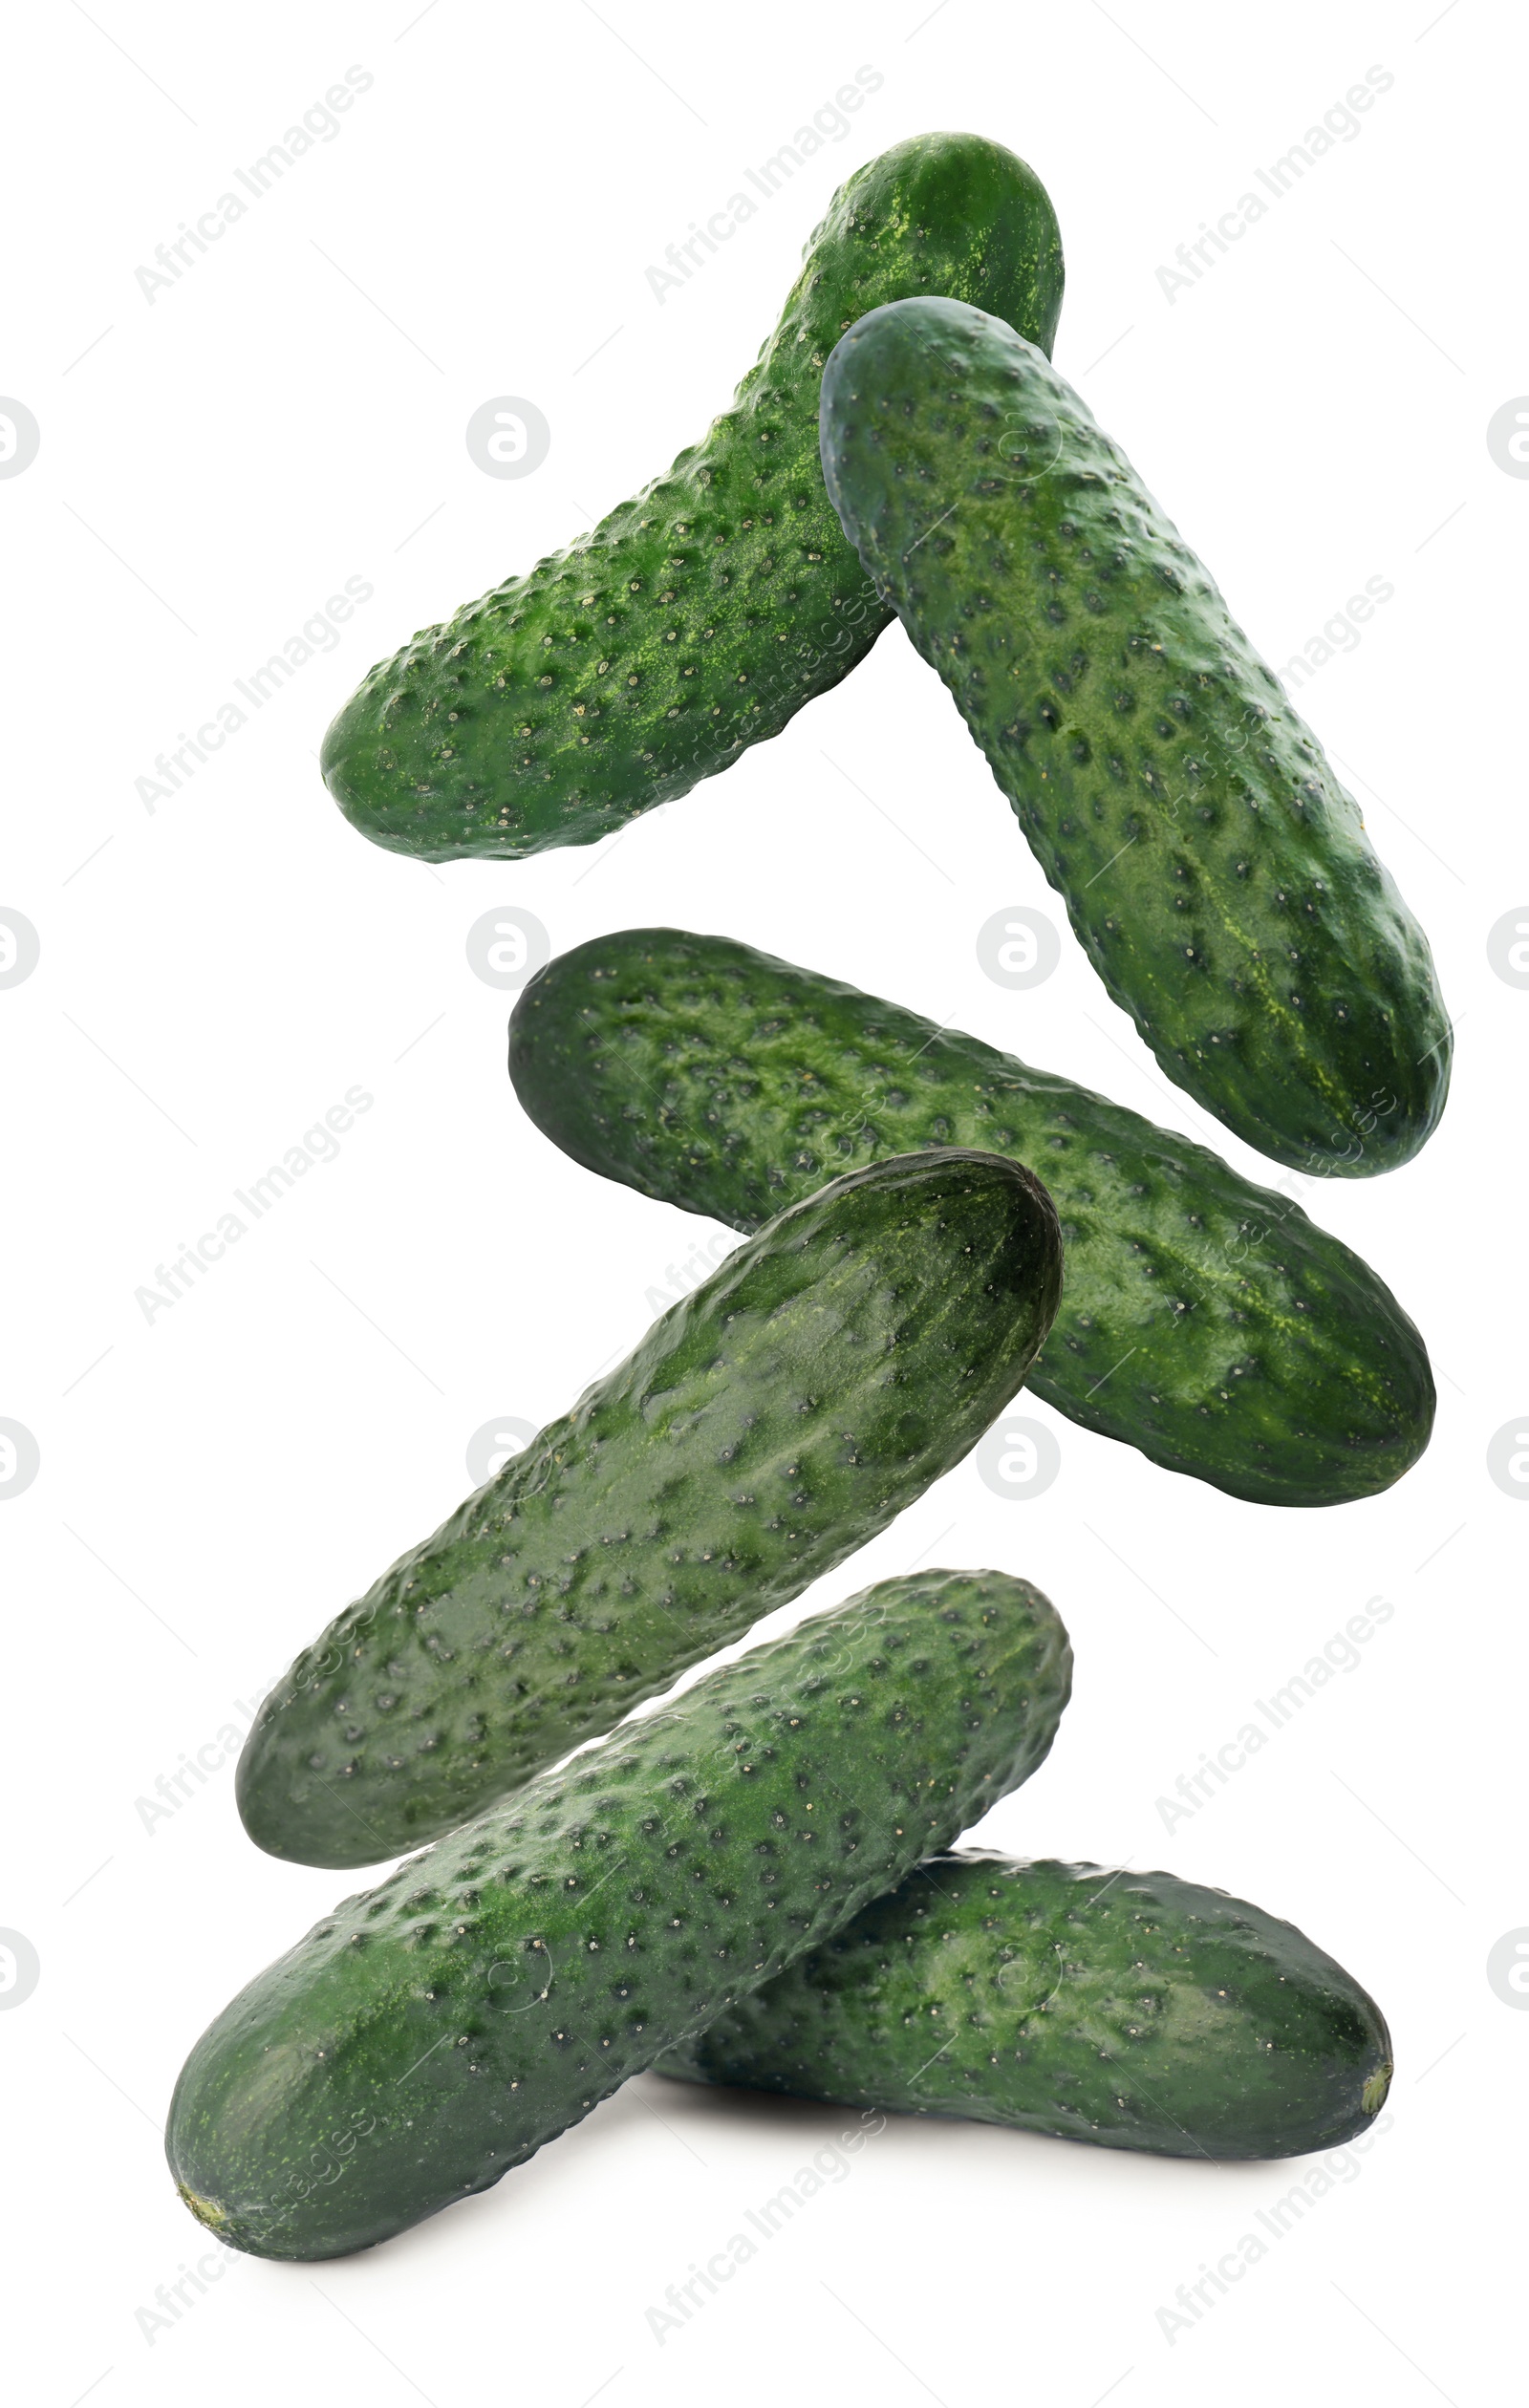 Image of Fresh green cucumbers falling on white background